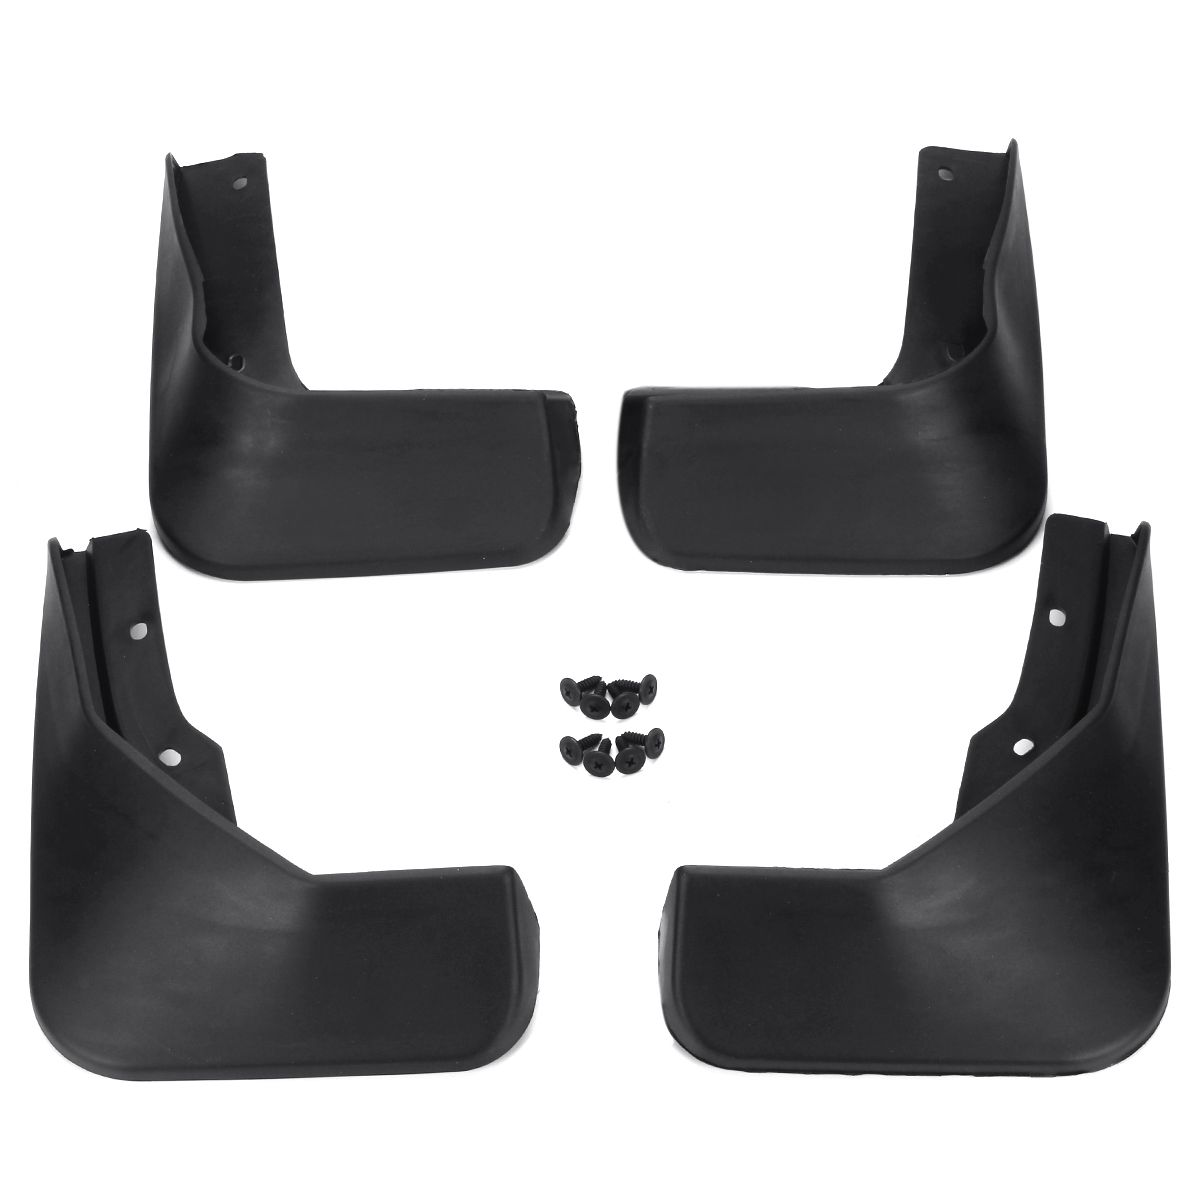 4Pcs-Car-Front-and-Rear-Mud-Flaps-Black-Plastic-Mudguards-for-VW-Jetta-2015-2017-1326693